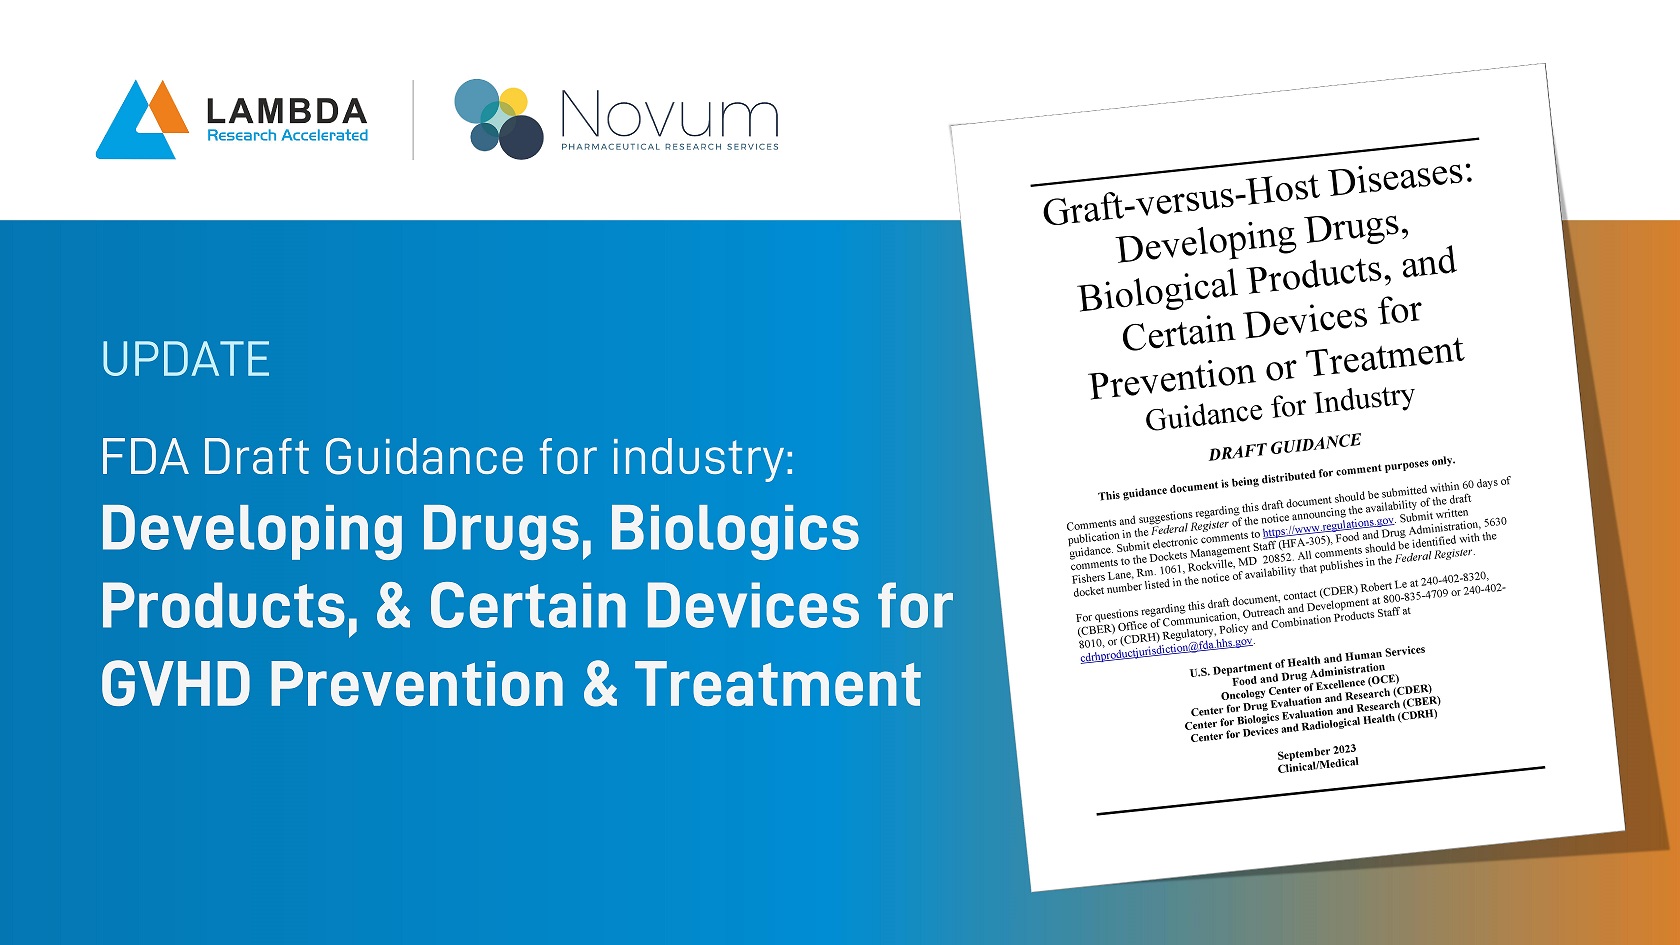 Read more about the article Graft-versus-Host Diseases: Developing Drugs, Biological Products, and Certain Devices for Prevention or Treatment